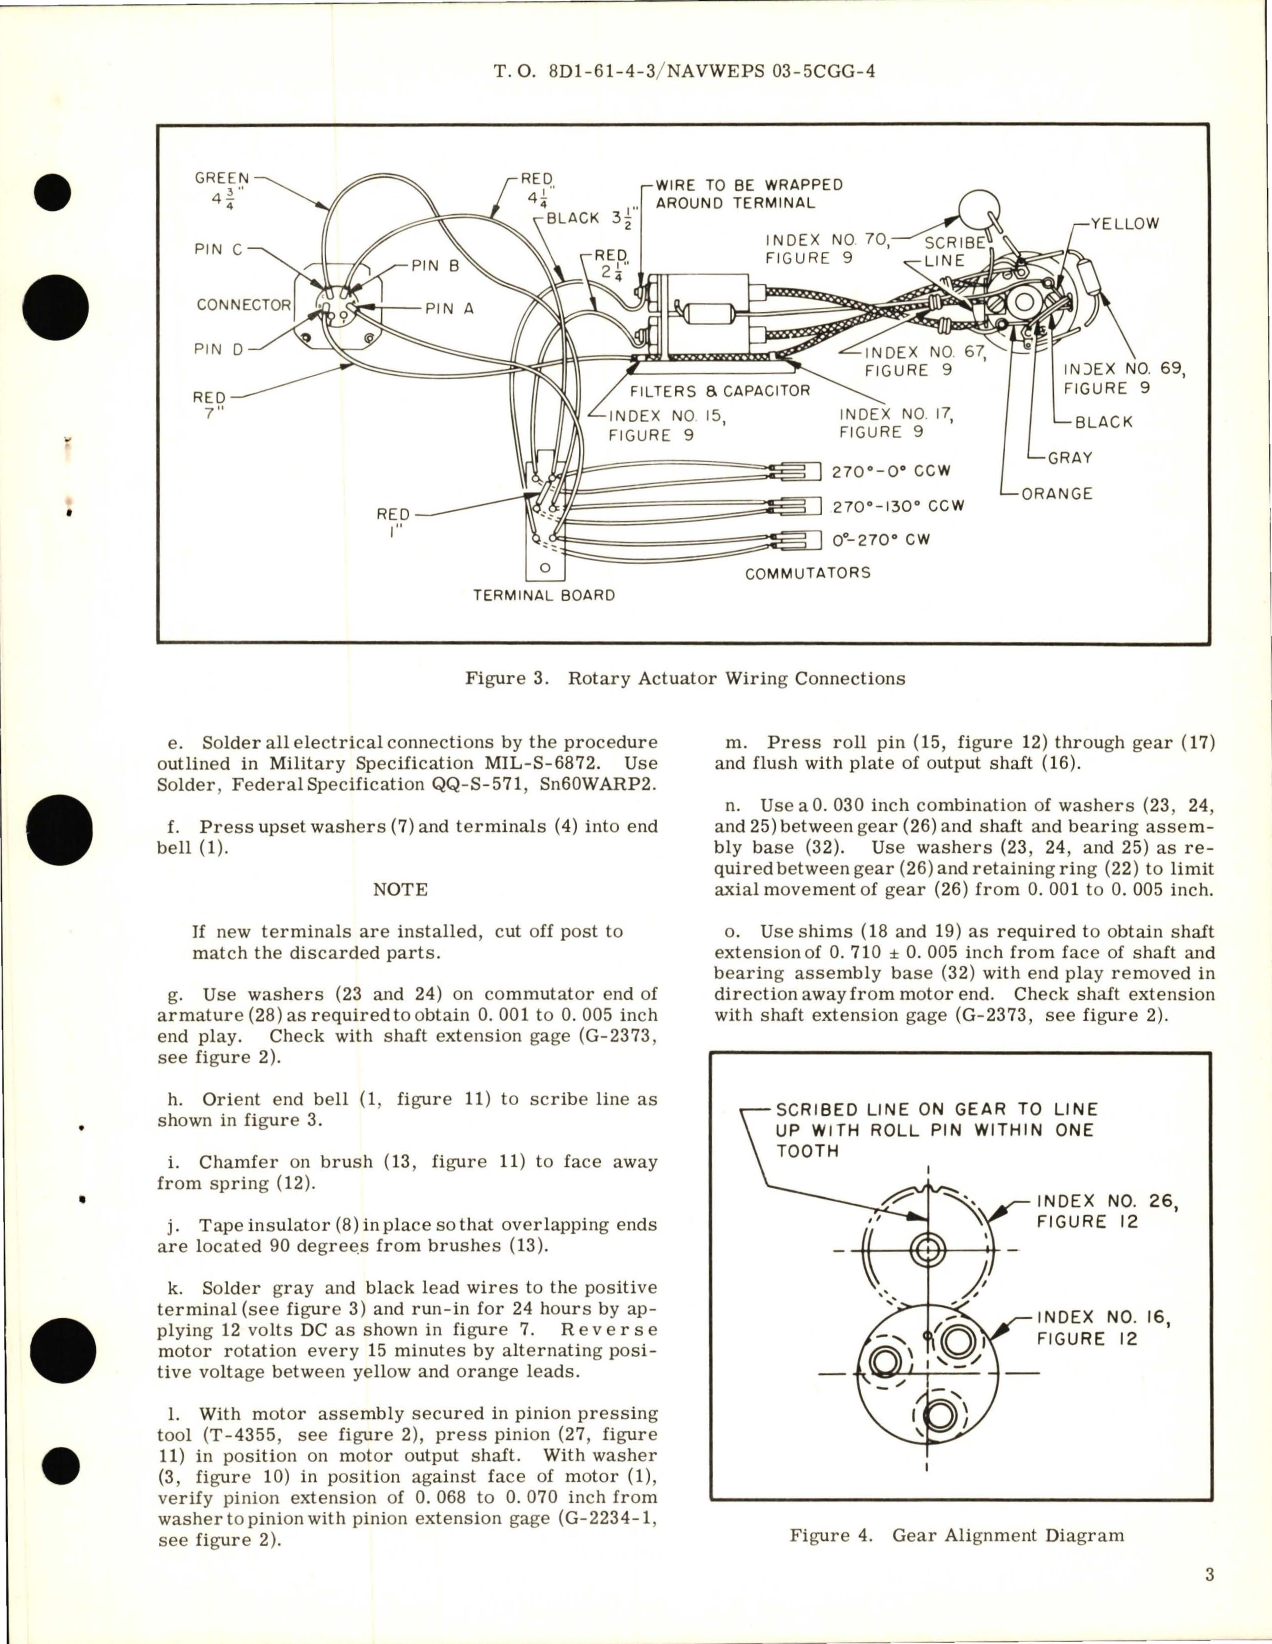 Sample page 5 from AirCorps Library document: Overhaul with Parts Breakdown for Rotary Actuator - Part 67A157, 67A189, 48743 and 73530 